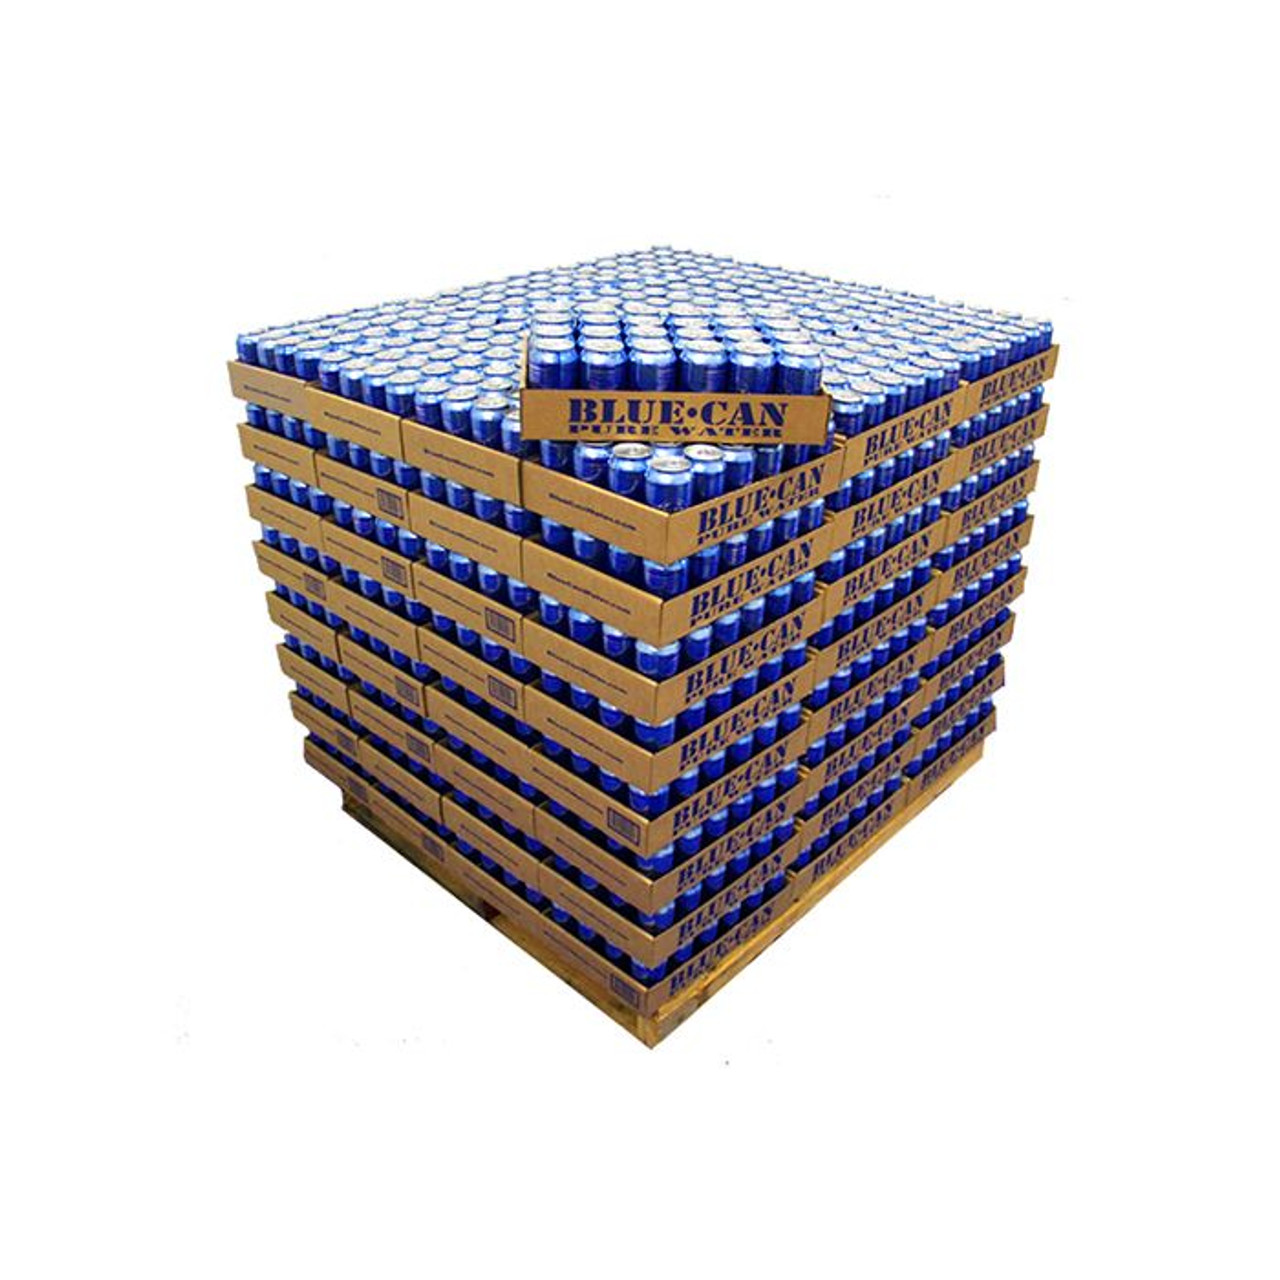 1200 Cans of Blue Can Emergency Survival Drinking Water 50 Year Shelf Life